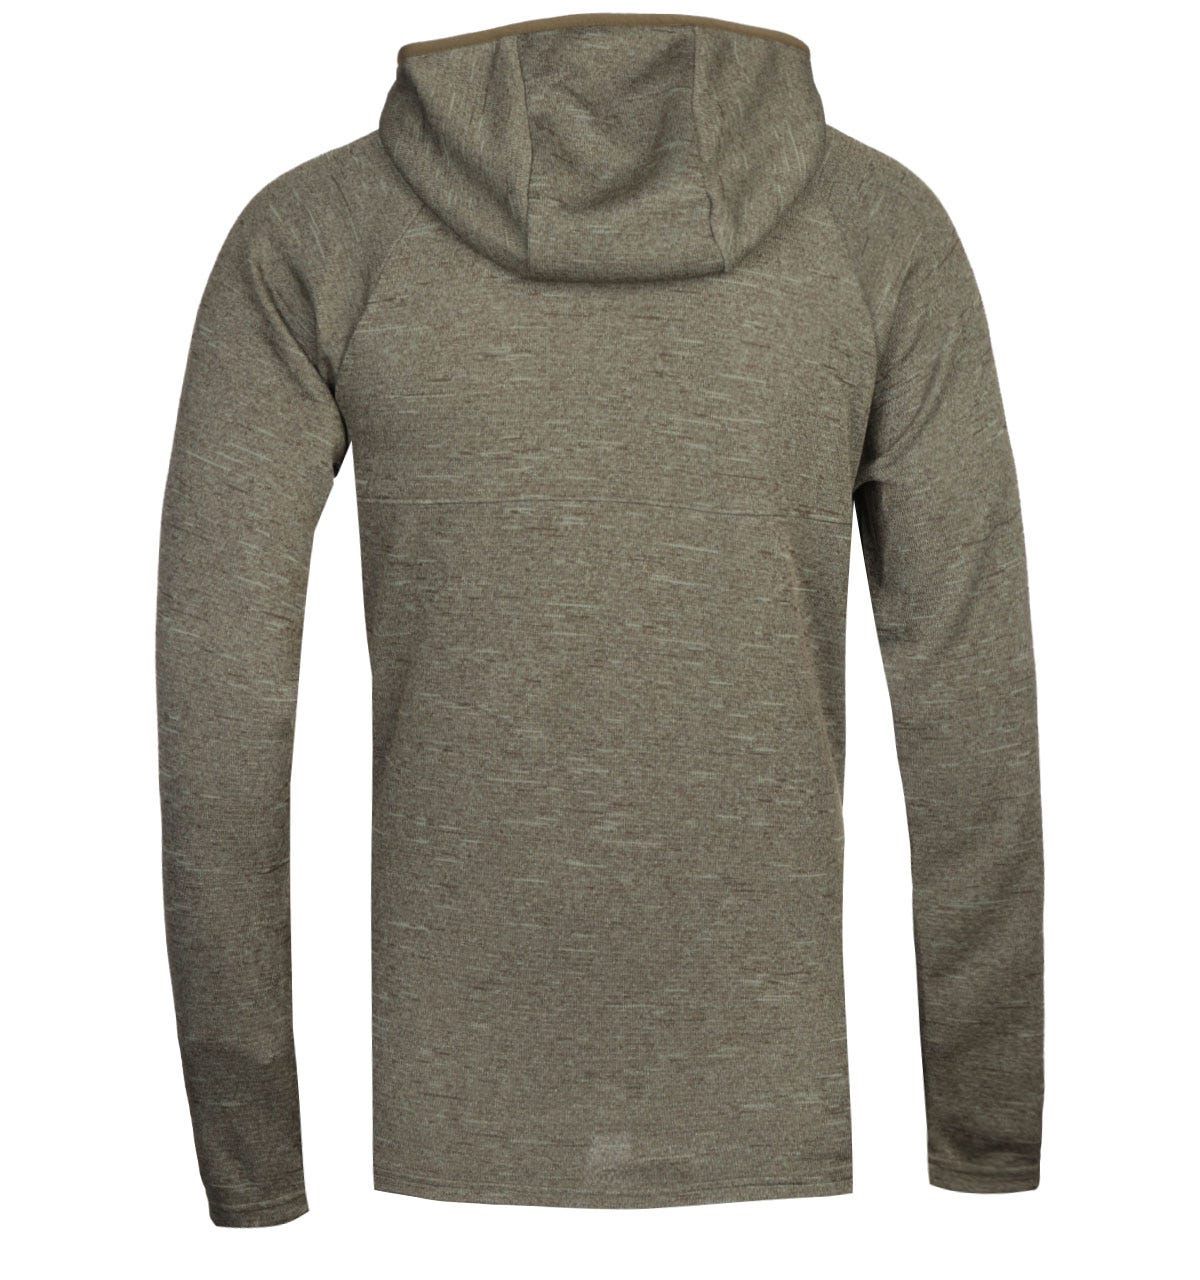 <p>A cool-season essential crafted by Columbia. The Columbia Maple Lake Green Hoodie is a pure polyester composition, fitted with a zip fastening and an elastane trim hood. The design is finished with the Columbia logo embroidered on the chest.</p><ul><li>Polyester composition</li><li>Zip fastening</li><li>Drawcord waistline</li><li>Columbia logo located on chest</li></ul><p>Style & Fit:</p><ul><li>Regular fit</li><li>Fits true to size</li></ul><p>Fabric Composition & Care:</p><ul><li>100% Polyester</li><li>Machine wash</li></ul>